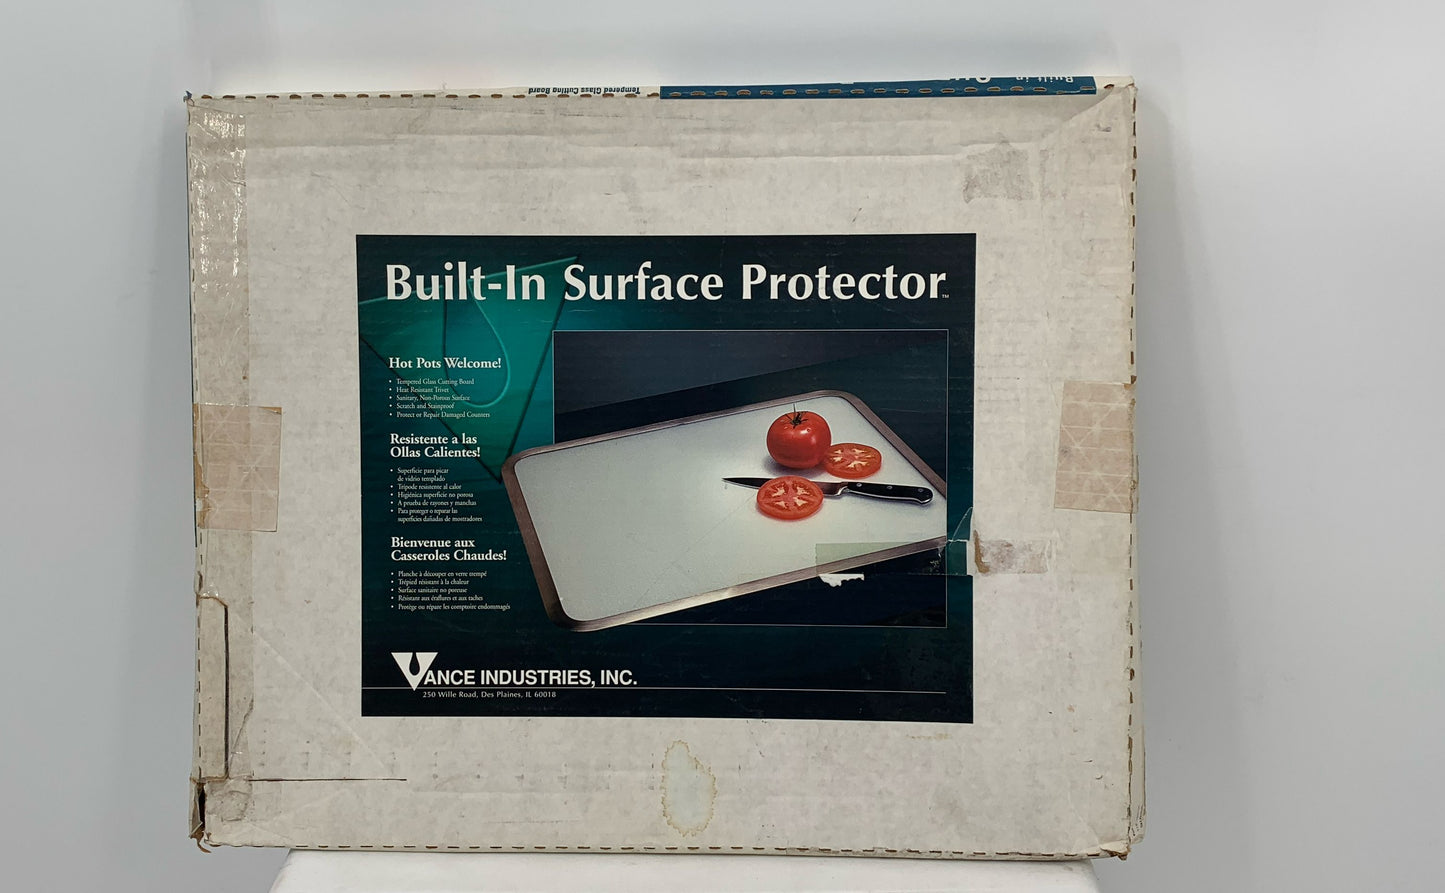 Vance Stainless Steel And Tempered Glass Built-In Surface Protector 16.5"x21"